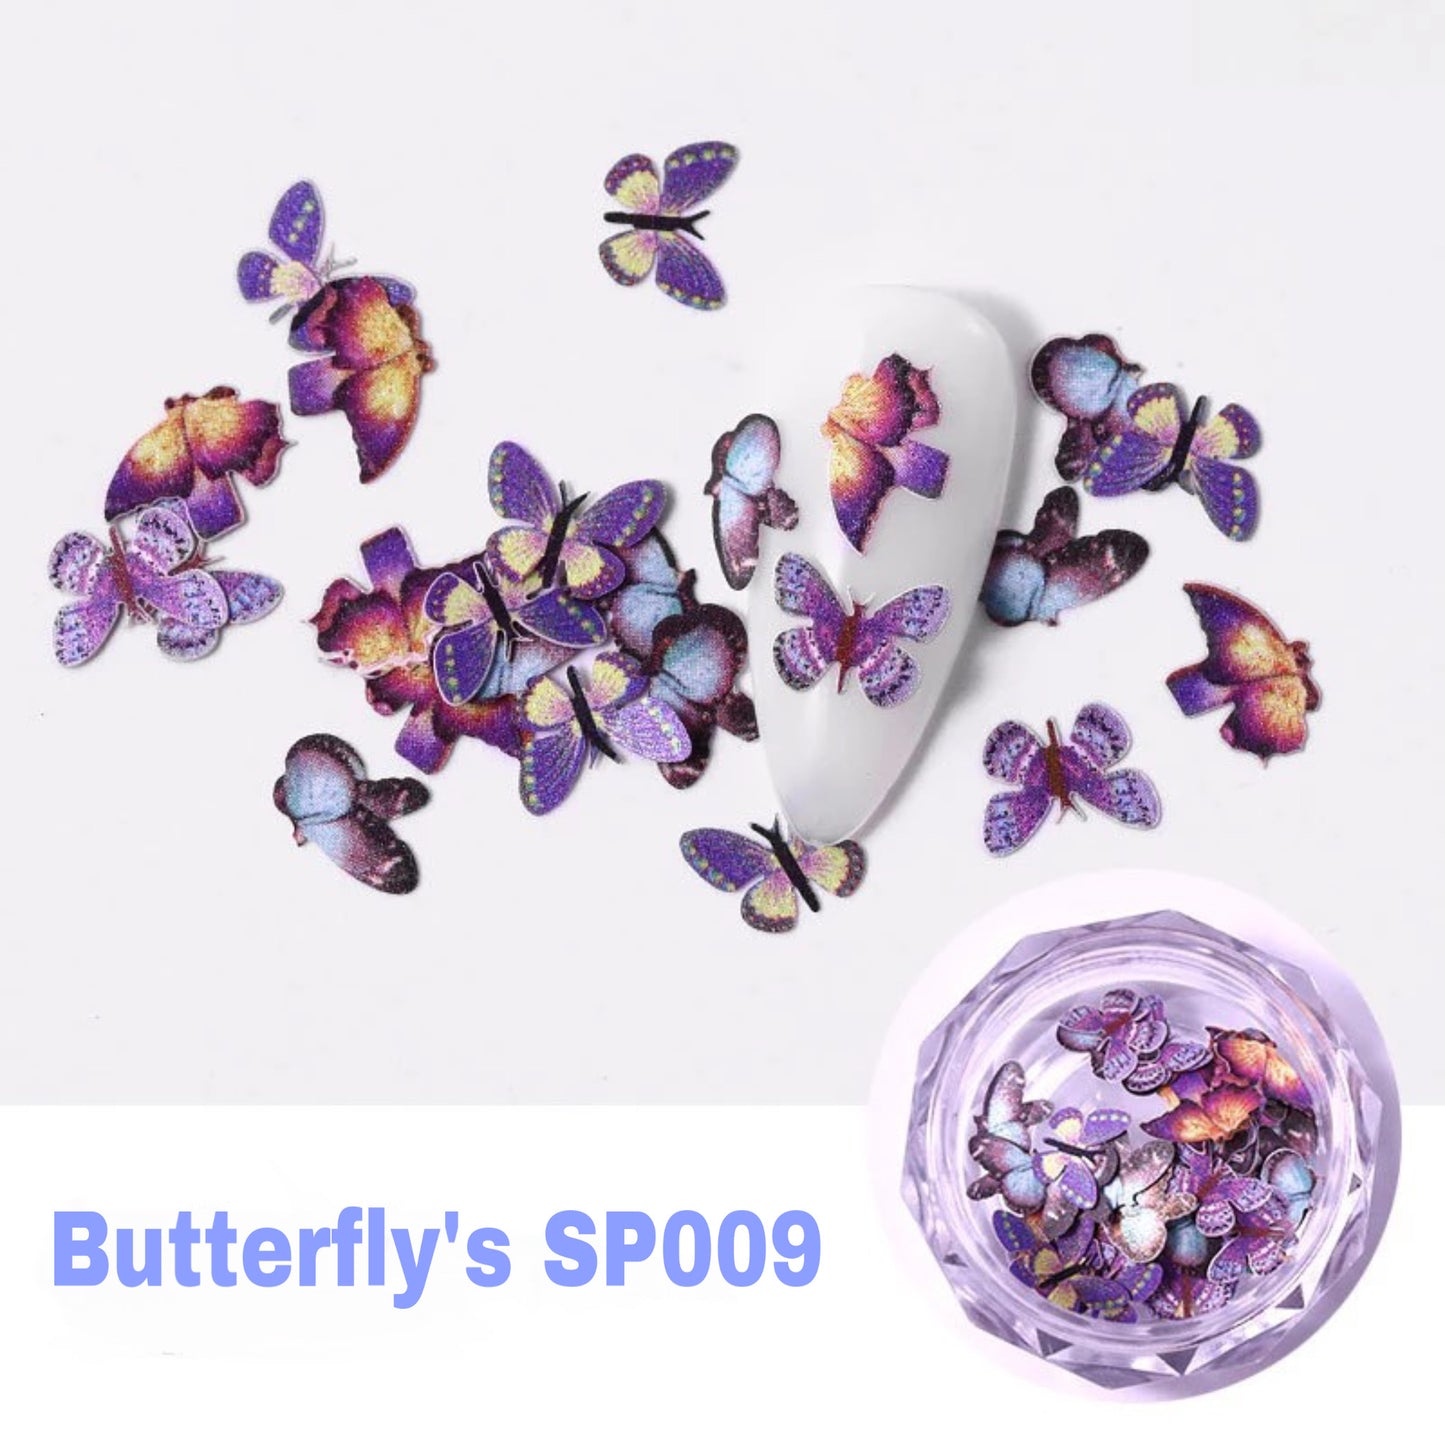 Butterfly’s SP009 - Premier Nail Supply 